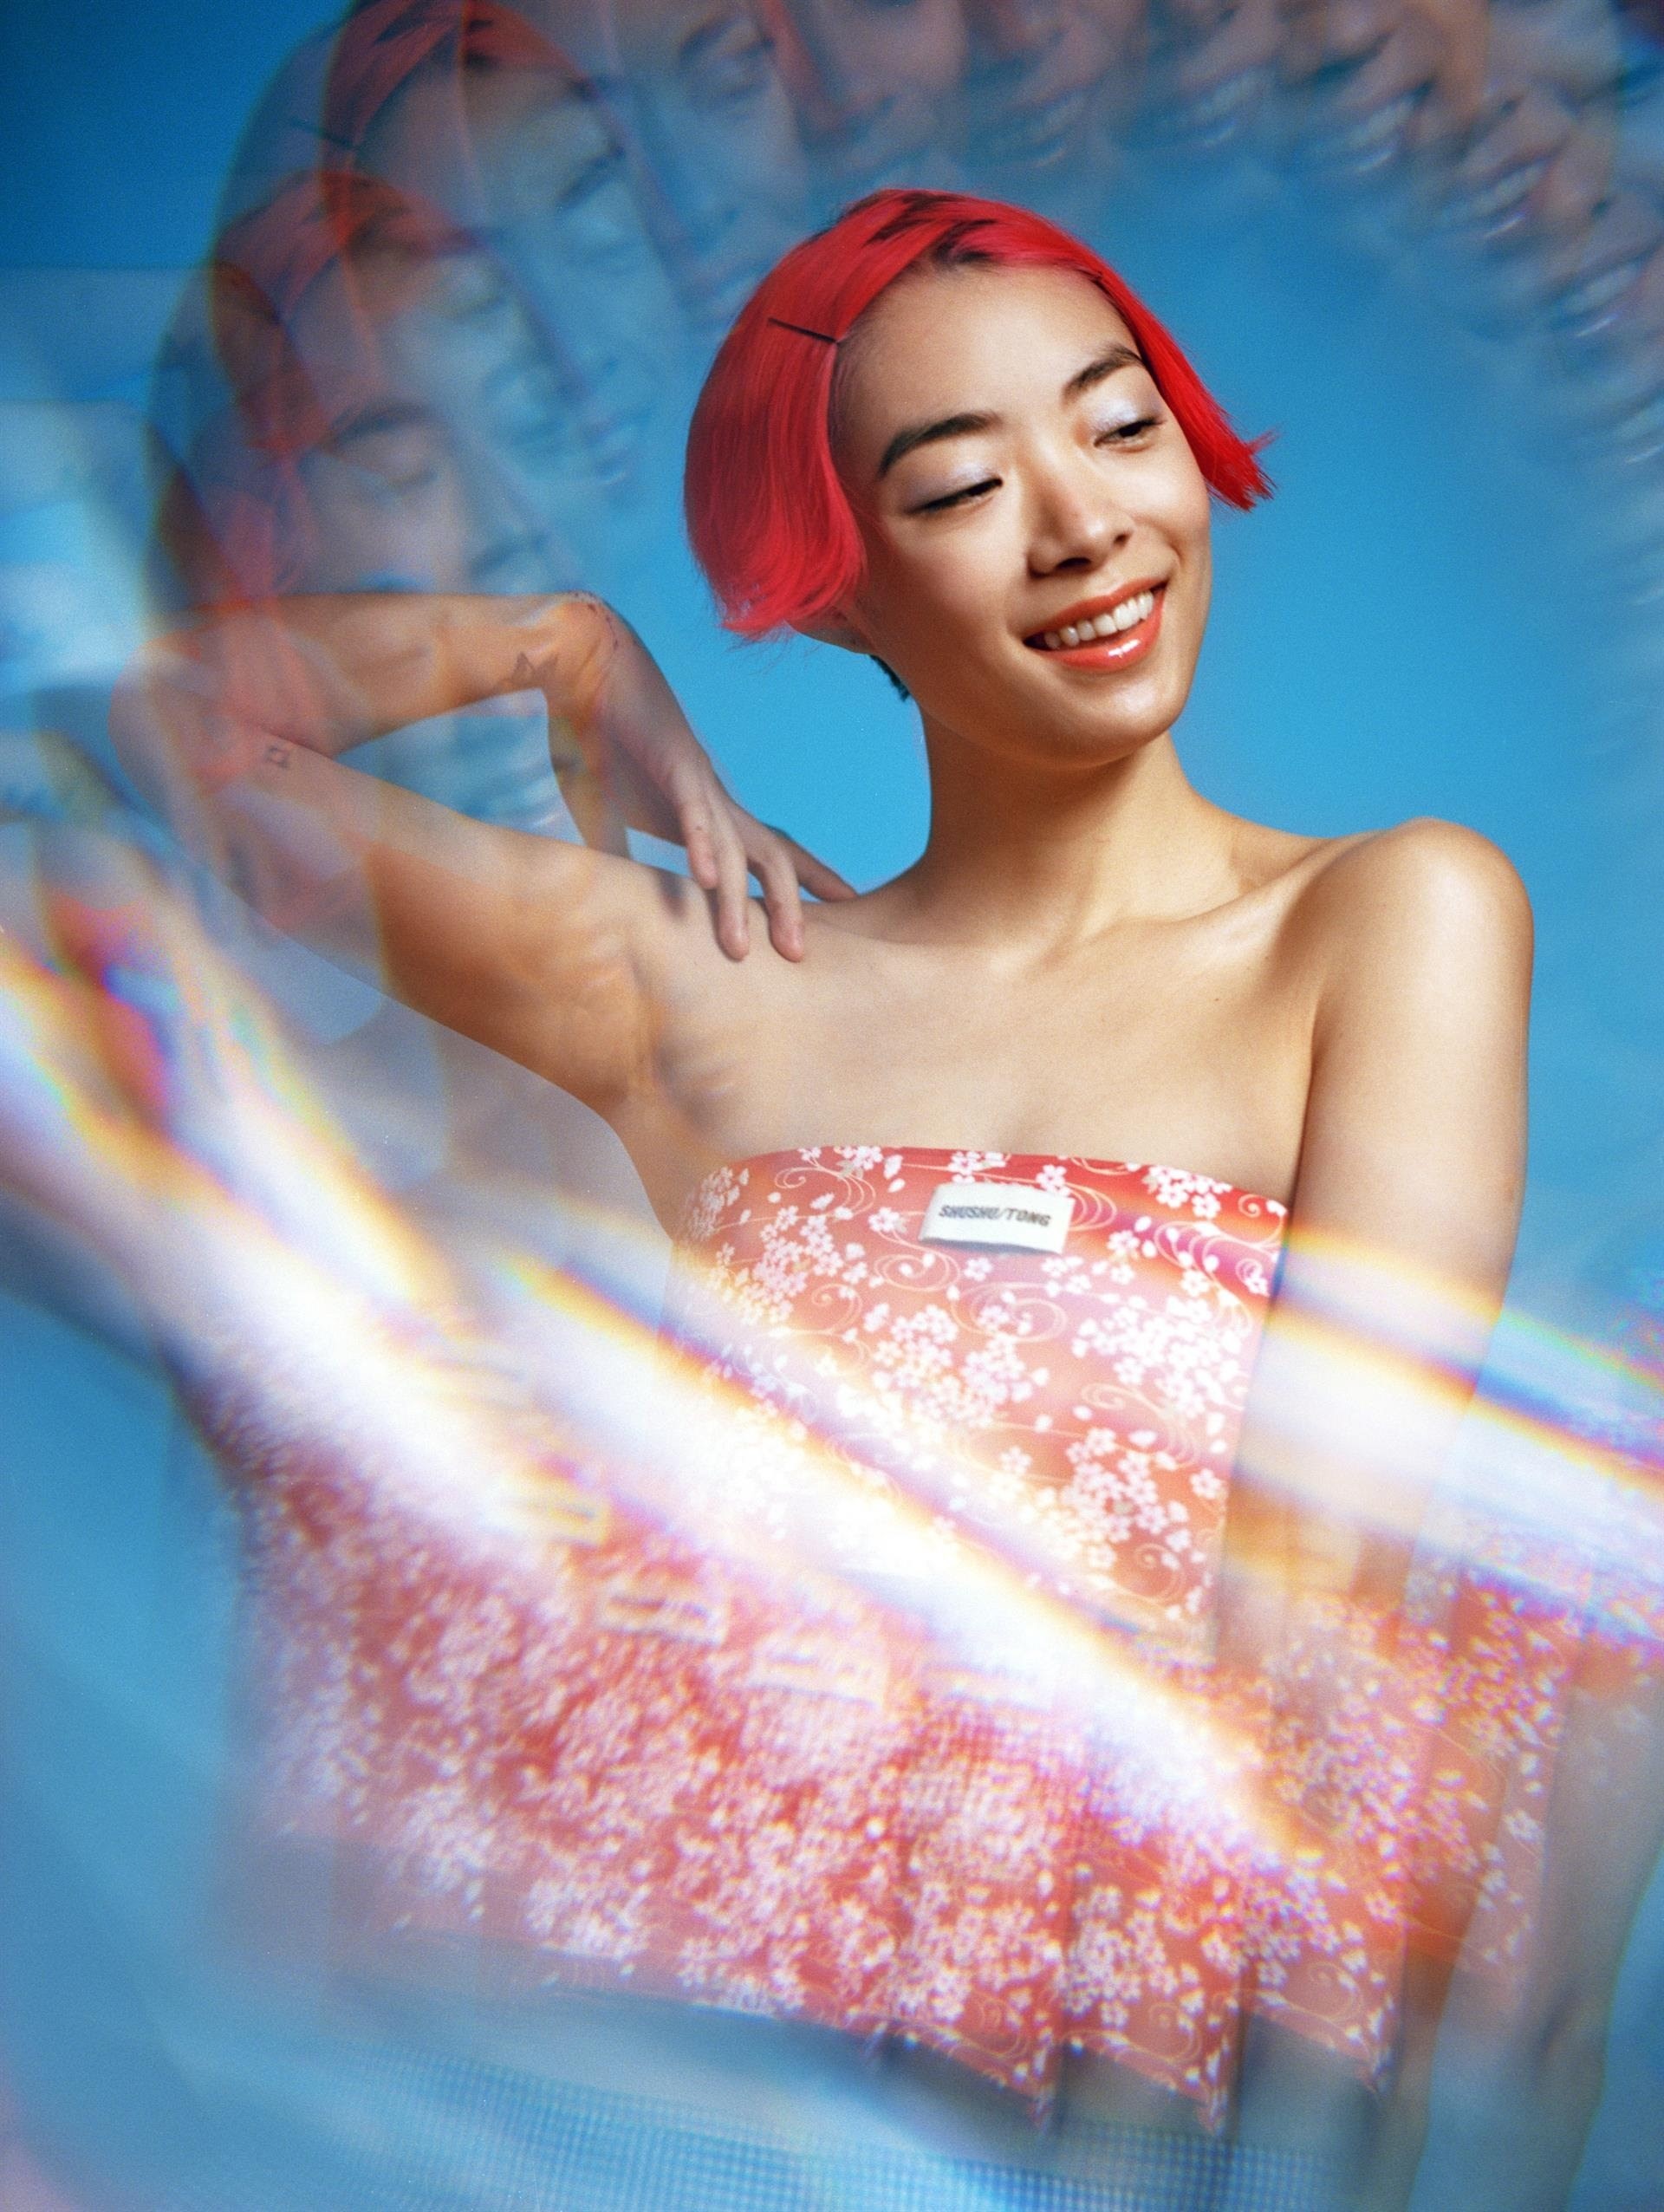 Rina Sawayama, Concert alone solution, Fear conquered, Dazed article, 1920x2560 HD Handy